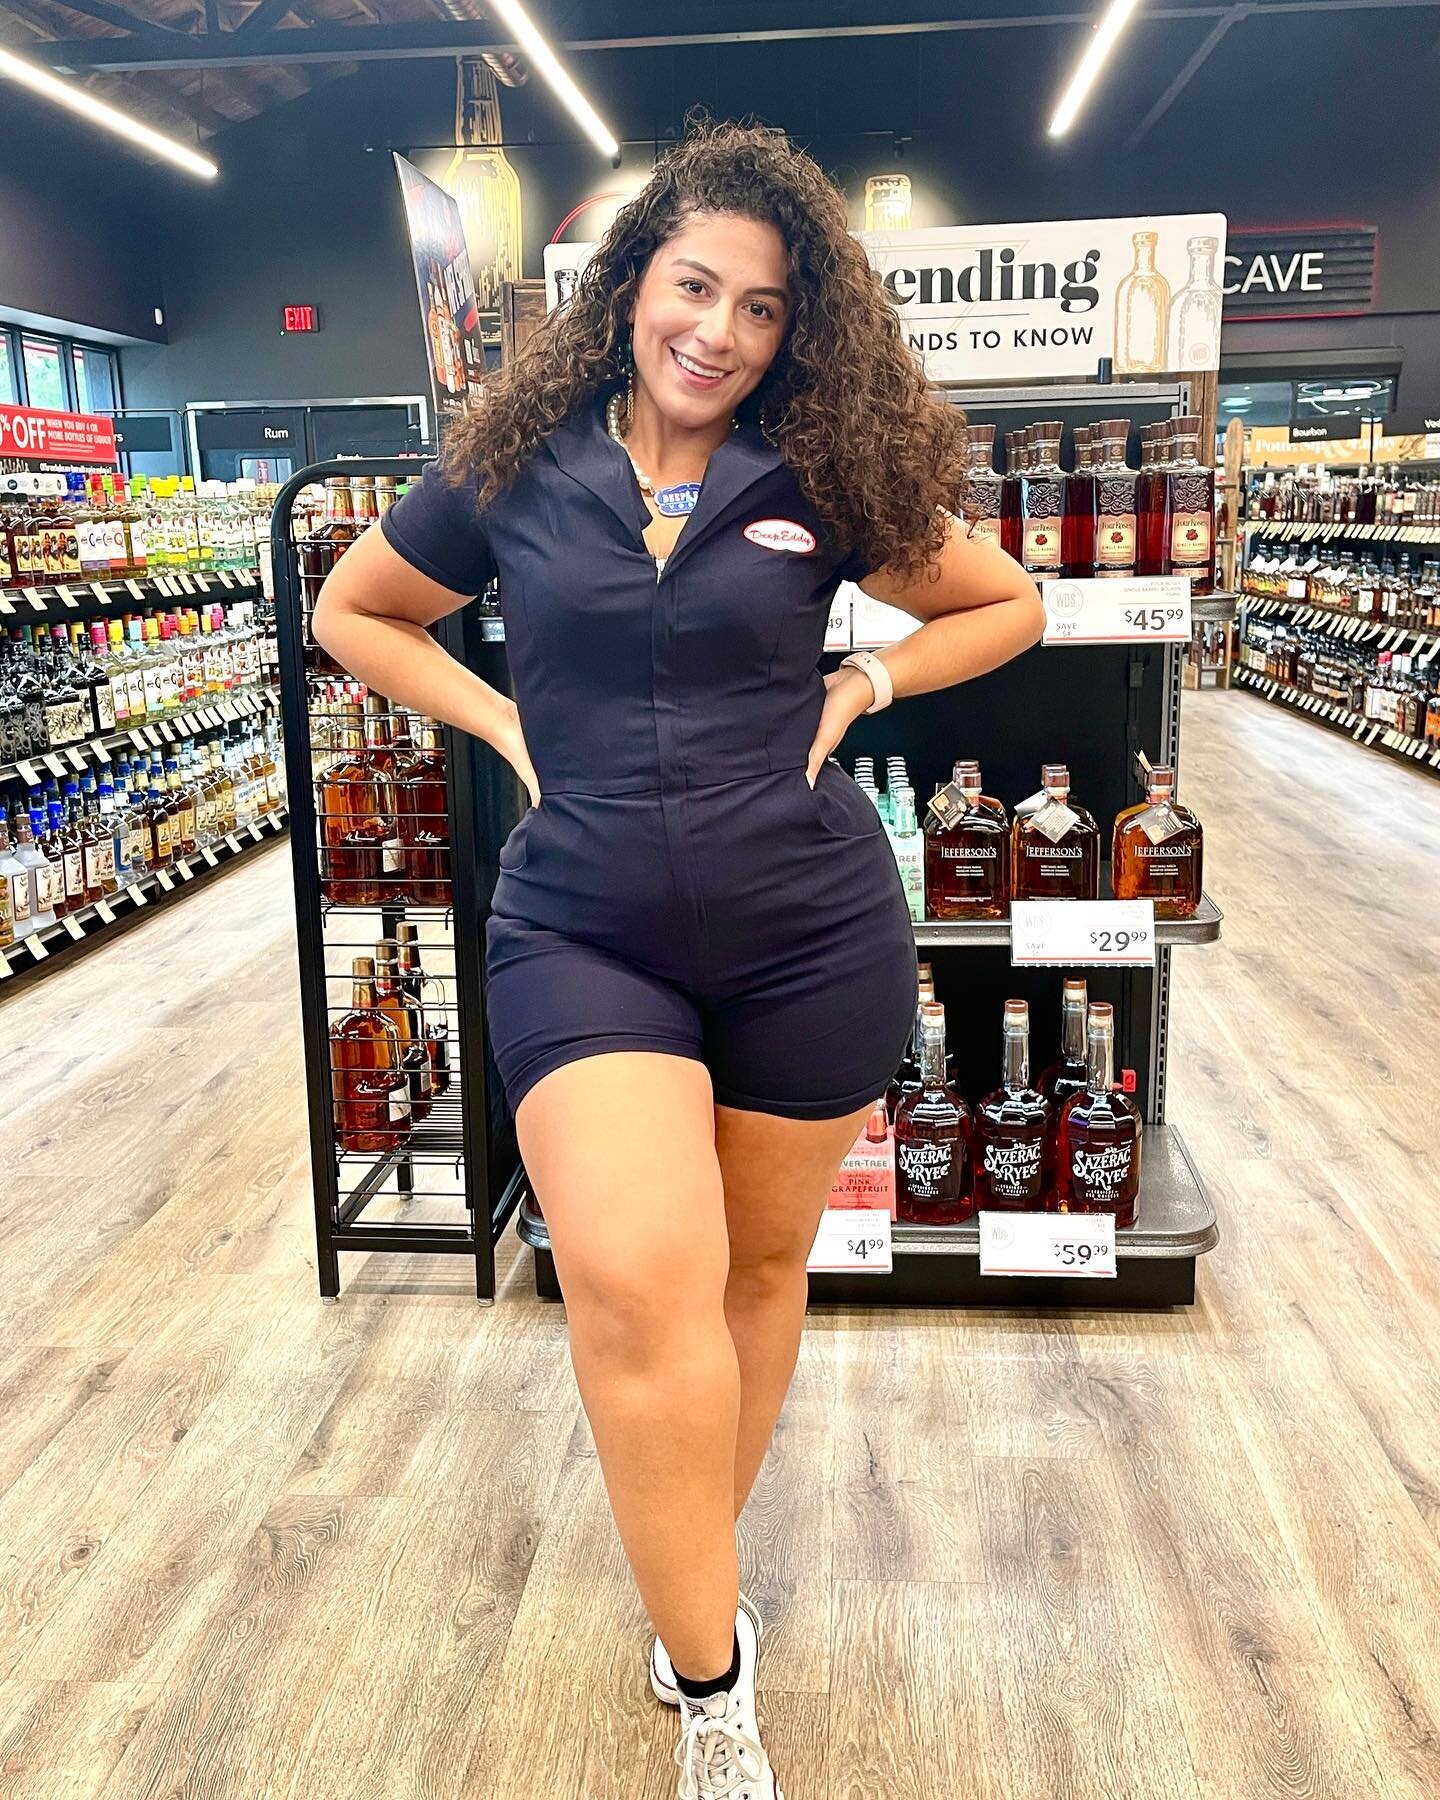 having fun promo modeling today with @deepeddyvodka and @micheleandgroup &hearts;️🌟&hearts;️

you have to enjoy the process of life and im glad that im documenting my little journey on the web!

check out these hamstrings!

i would have never worn t